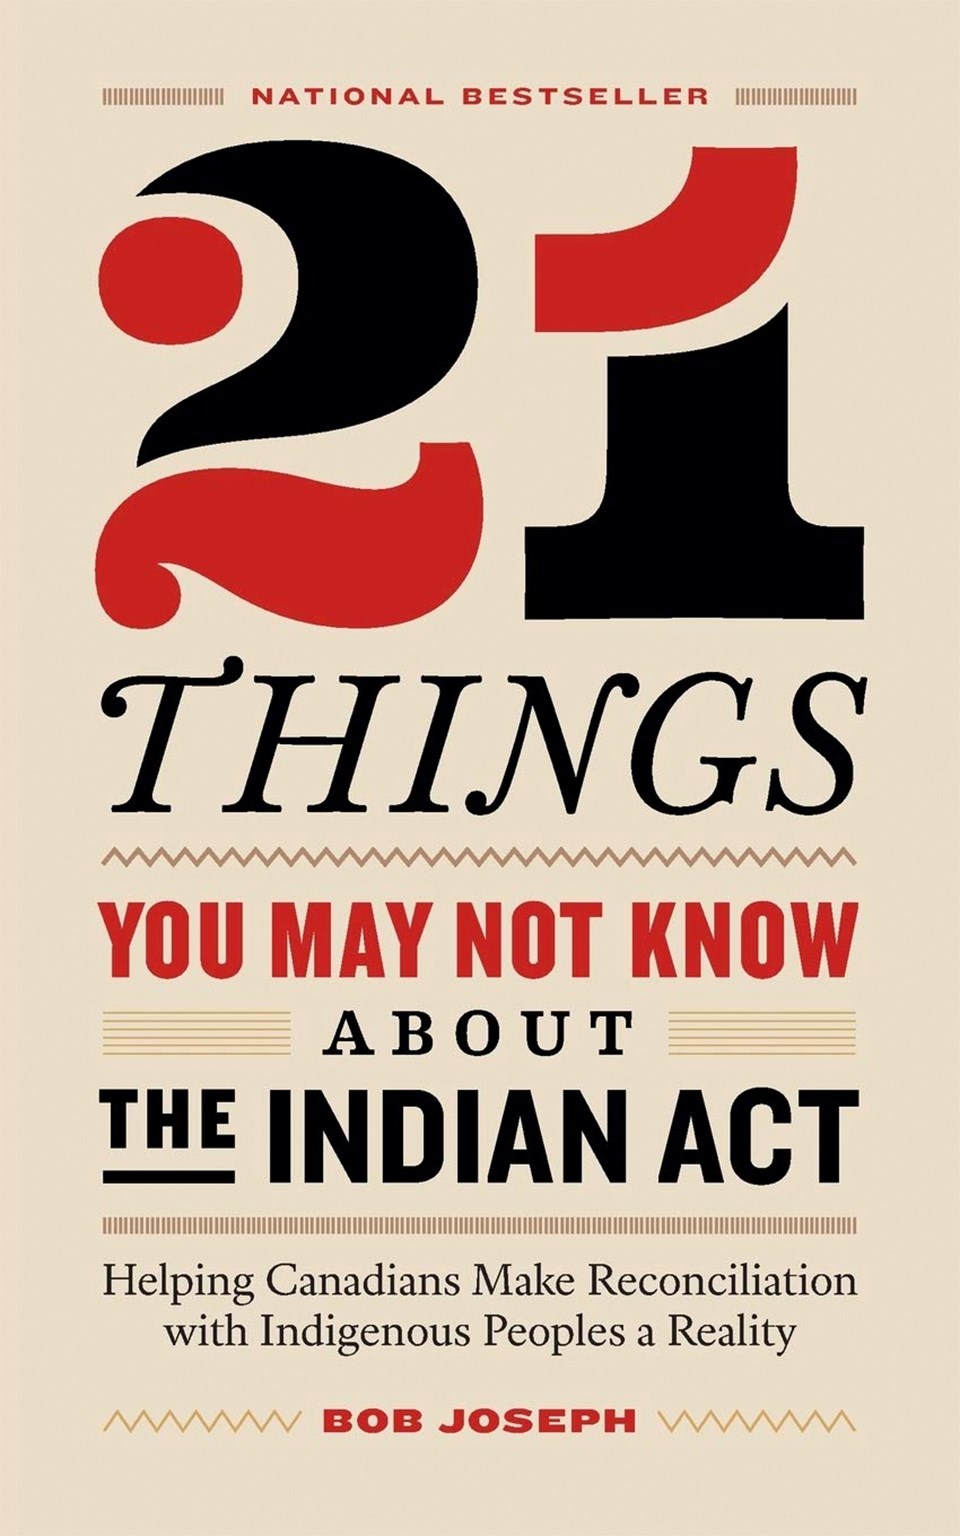 21-things-about-the-indian-act-bob-joseph-cover